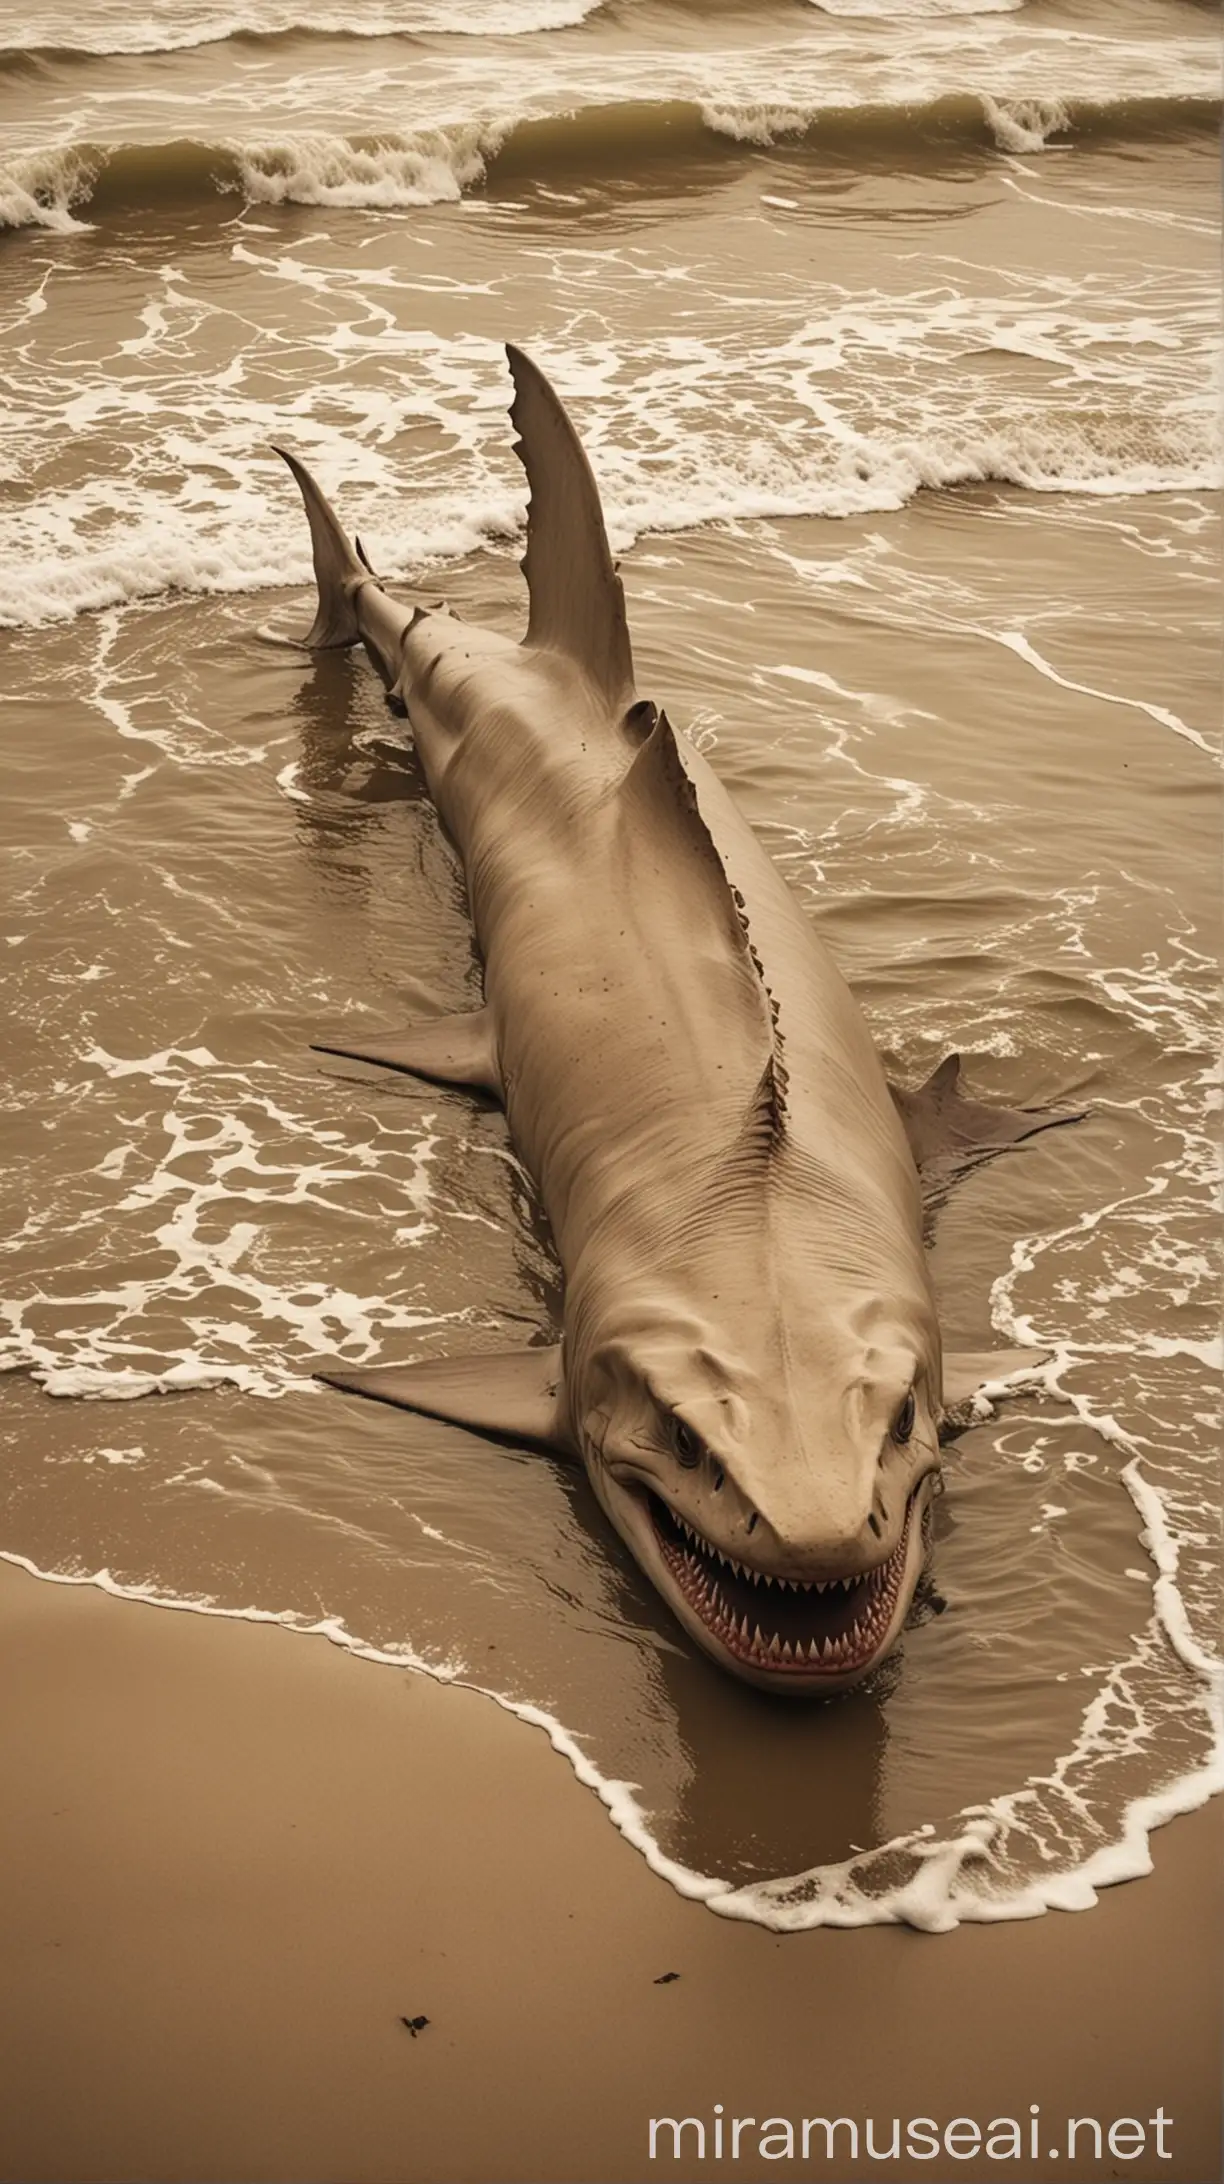 Giant Goblin Shark Washed Up on Beach in Vintage Style Photograph